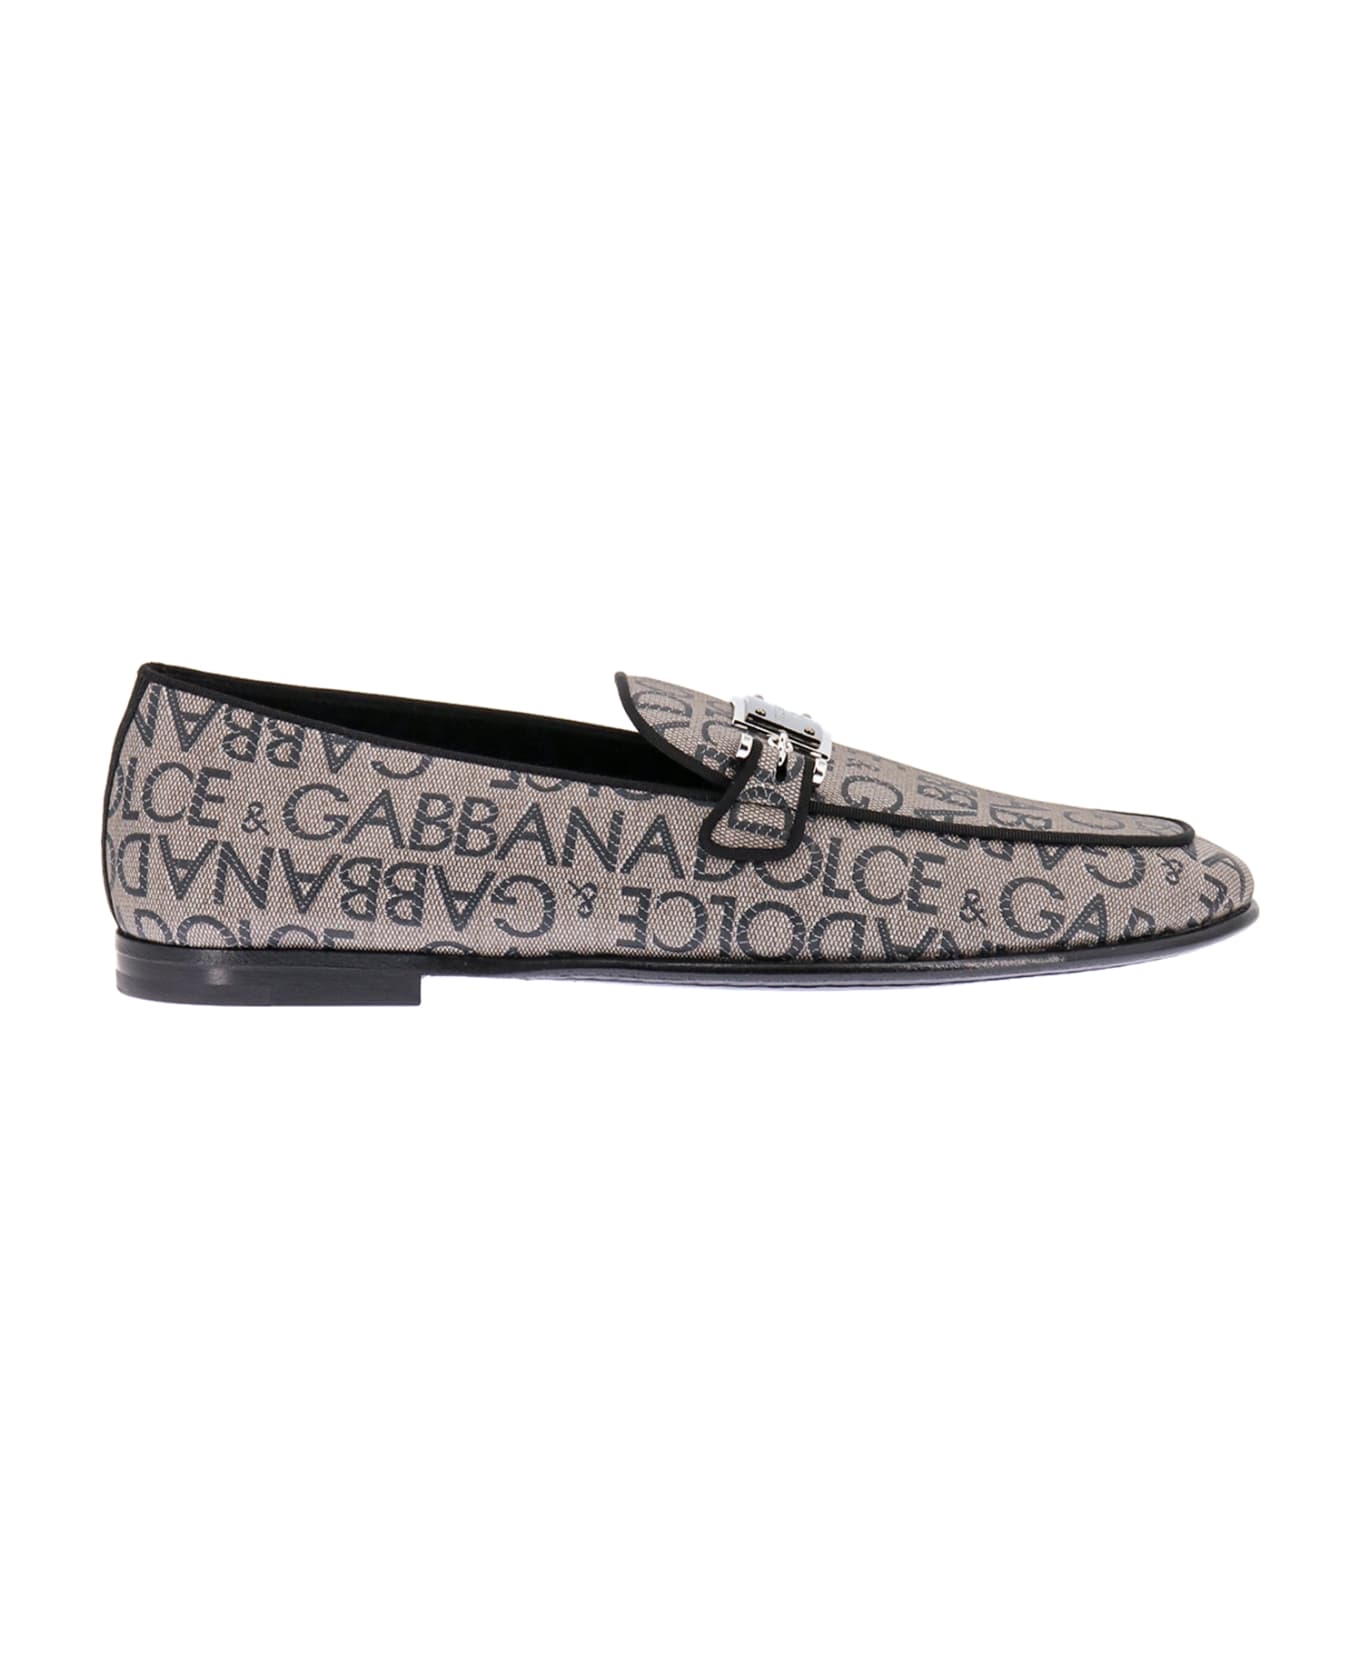 Dolce & Gabbana Loafers - Taupe